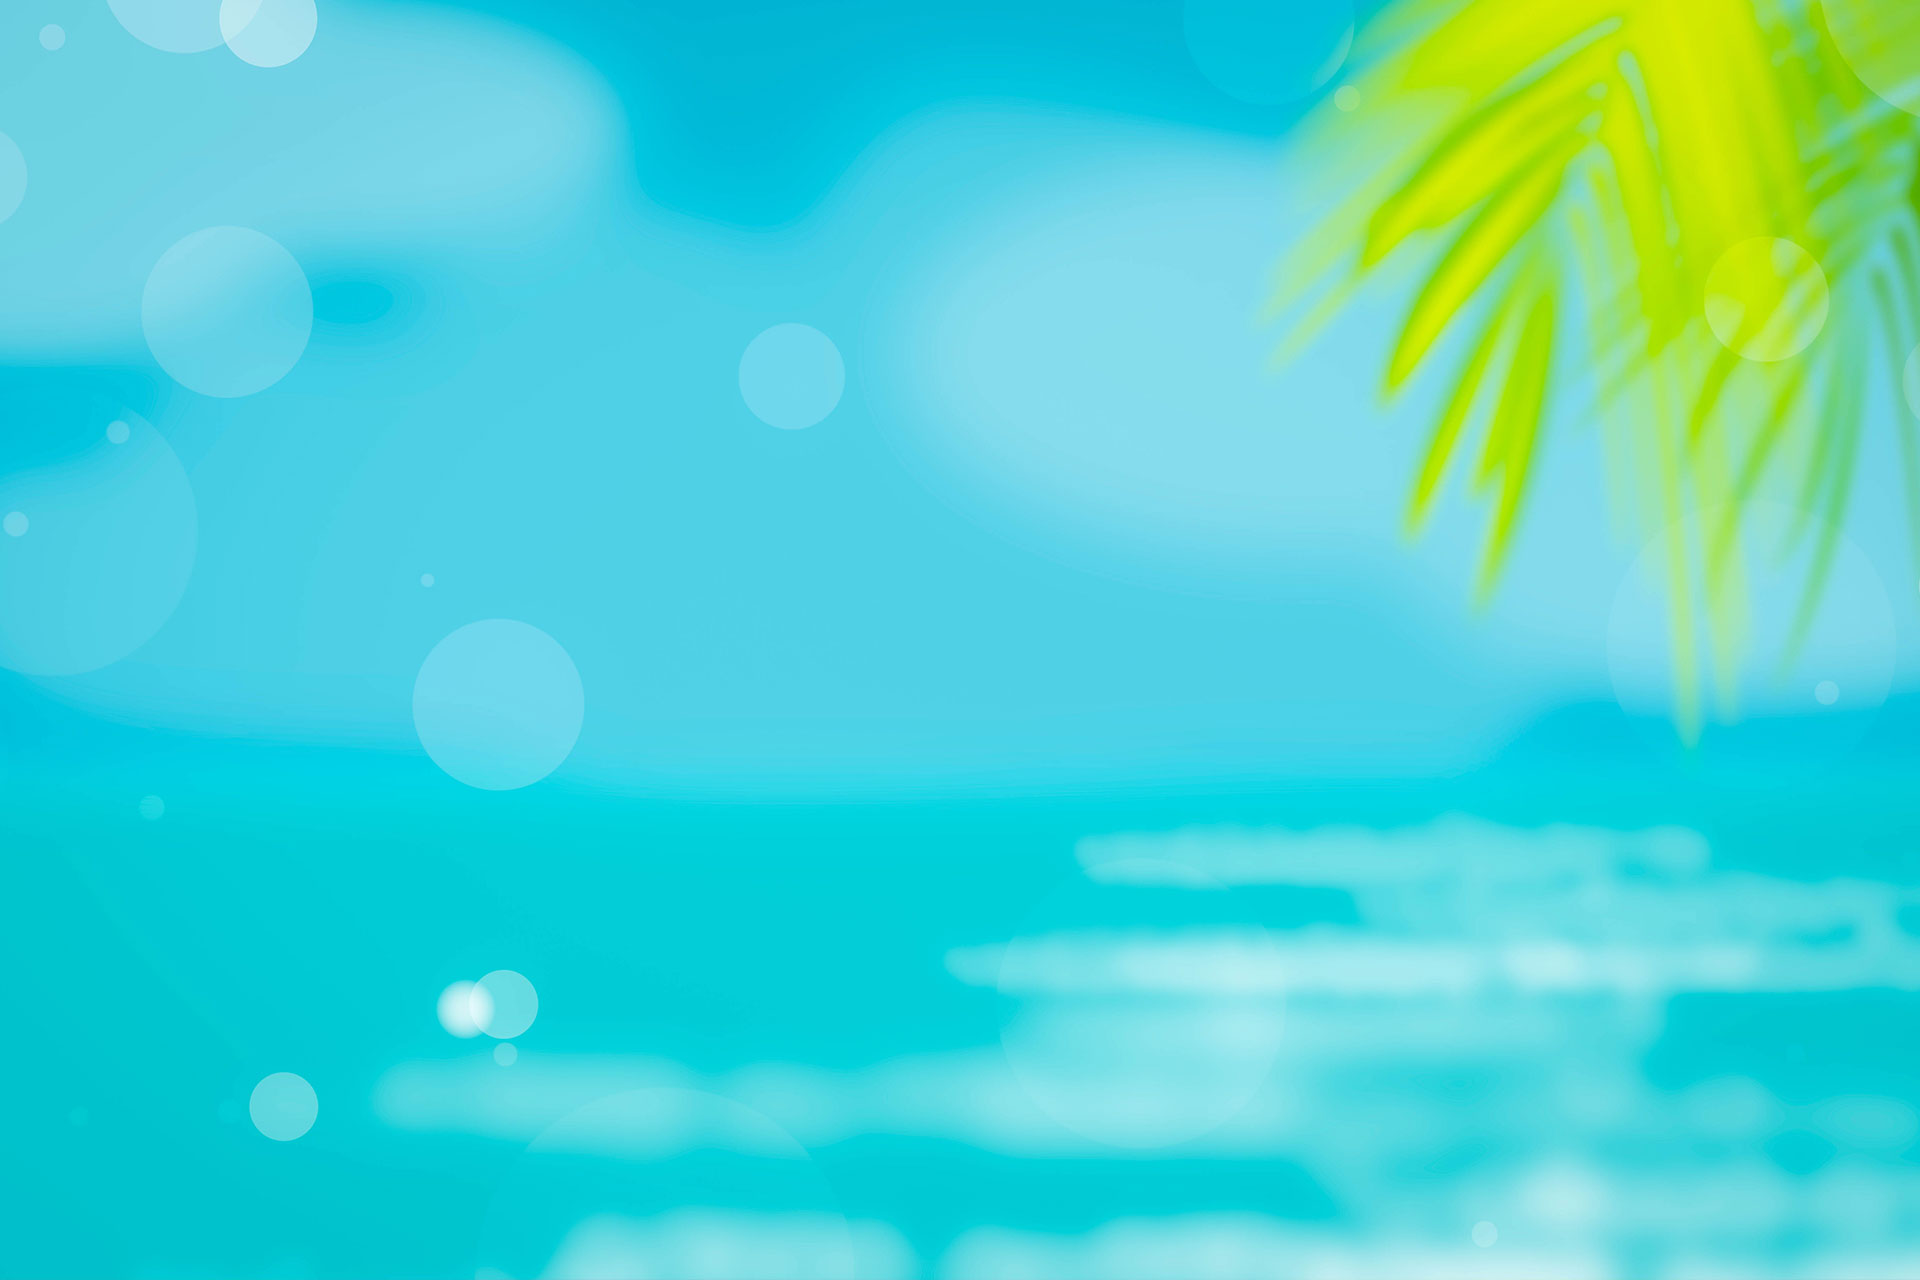 elements-mall-summer-background